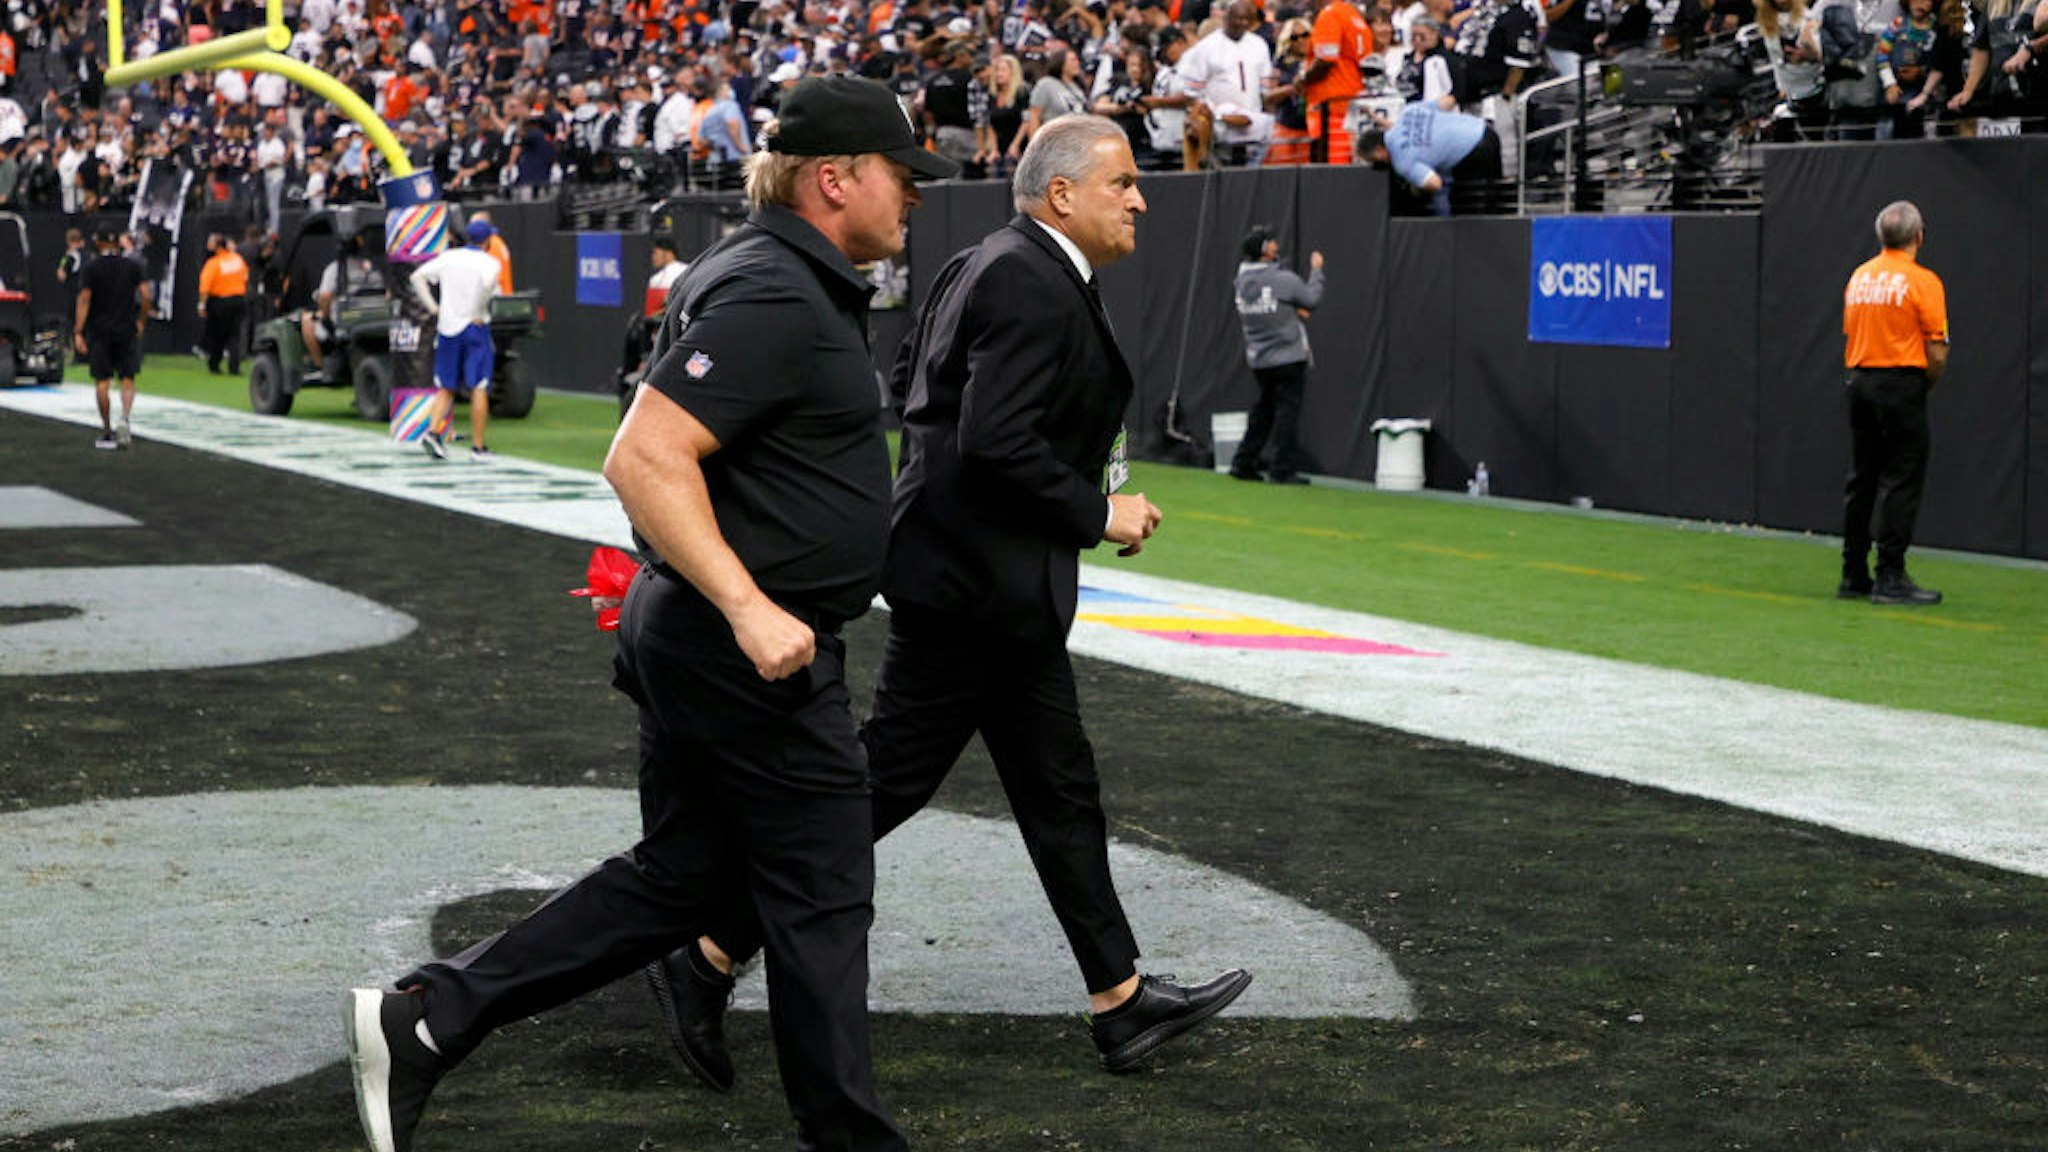 LAS VEGAS, NEVADA - OCTOBER 10: Head coach Jon Gruden (L) of the Las Vegas Raiders and Raiders director of team security Bob Stiriti run off the field after the team's 20-9 loss to the Chicago Bears at Allegiant Stadium on October 10, 2021 in Las Vegas, Nevada. (Photo by Ethan Miller/Getty Images)